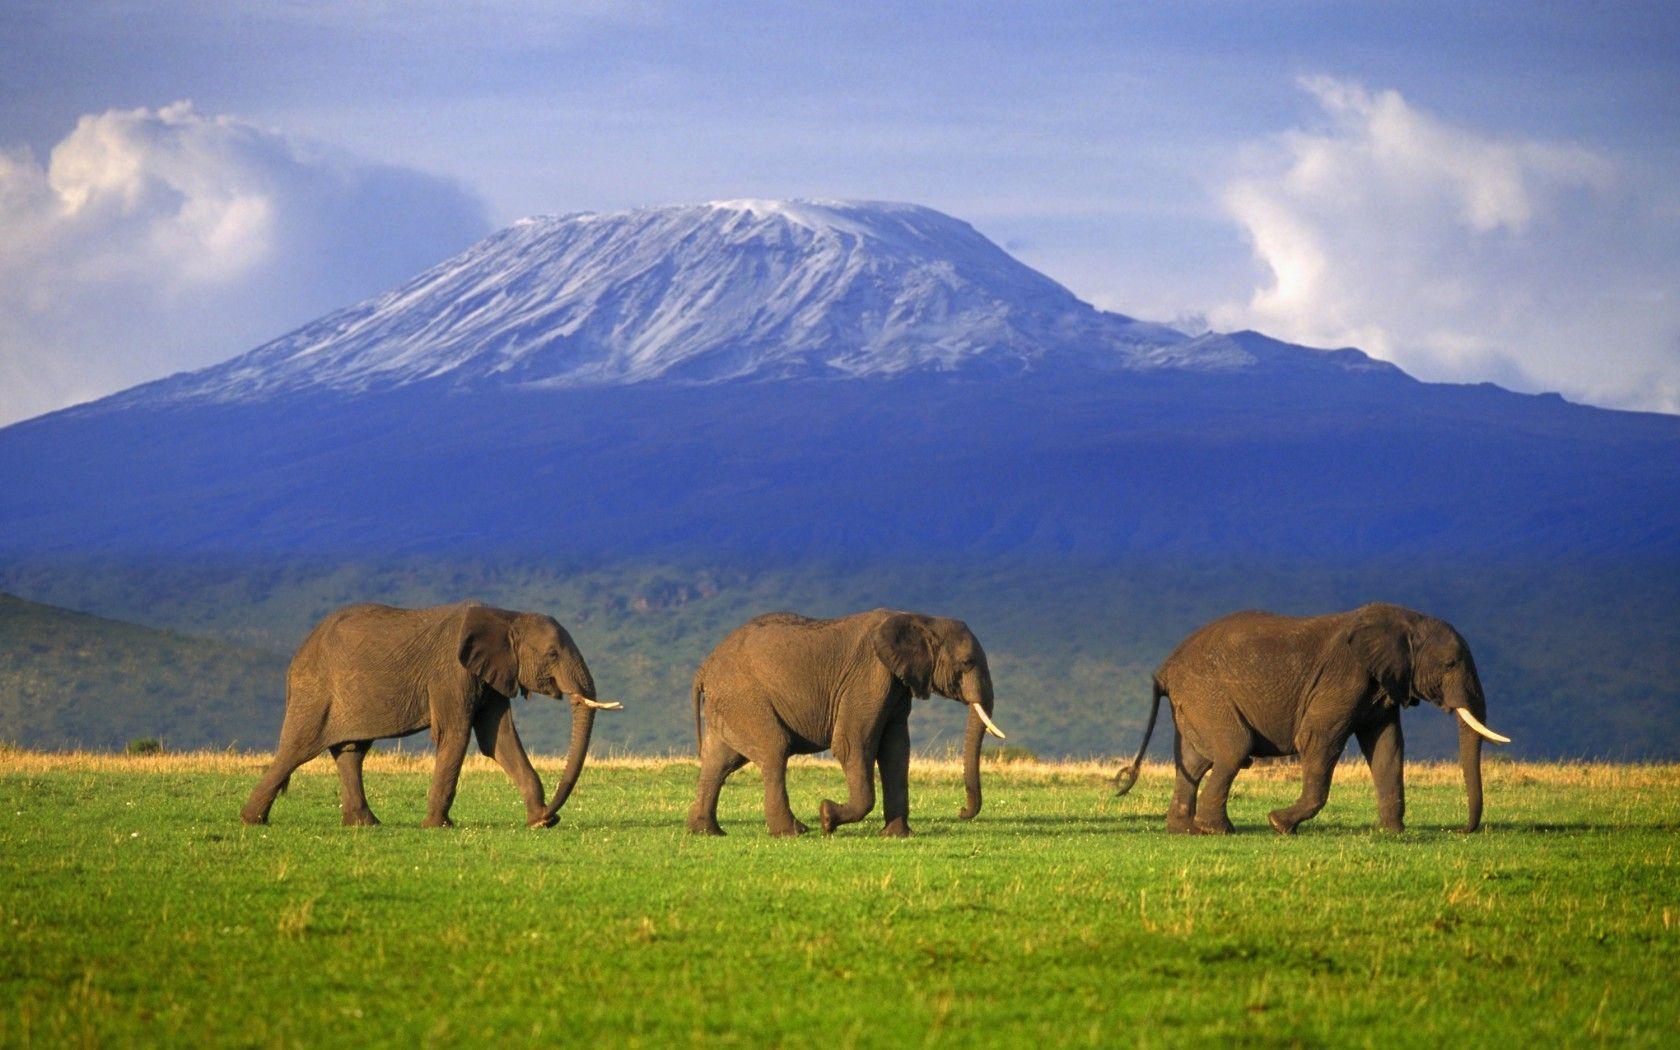 MOUNT KILIMANJARO: my daughter's goal is to climb this some day